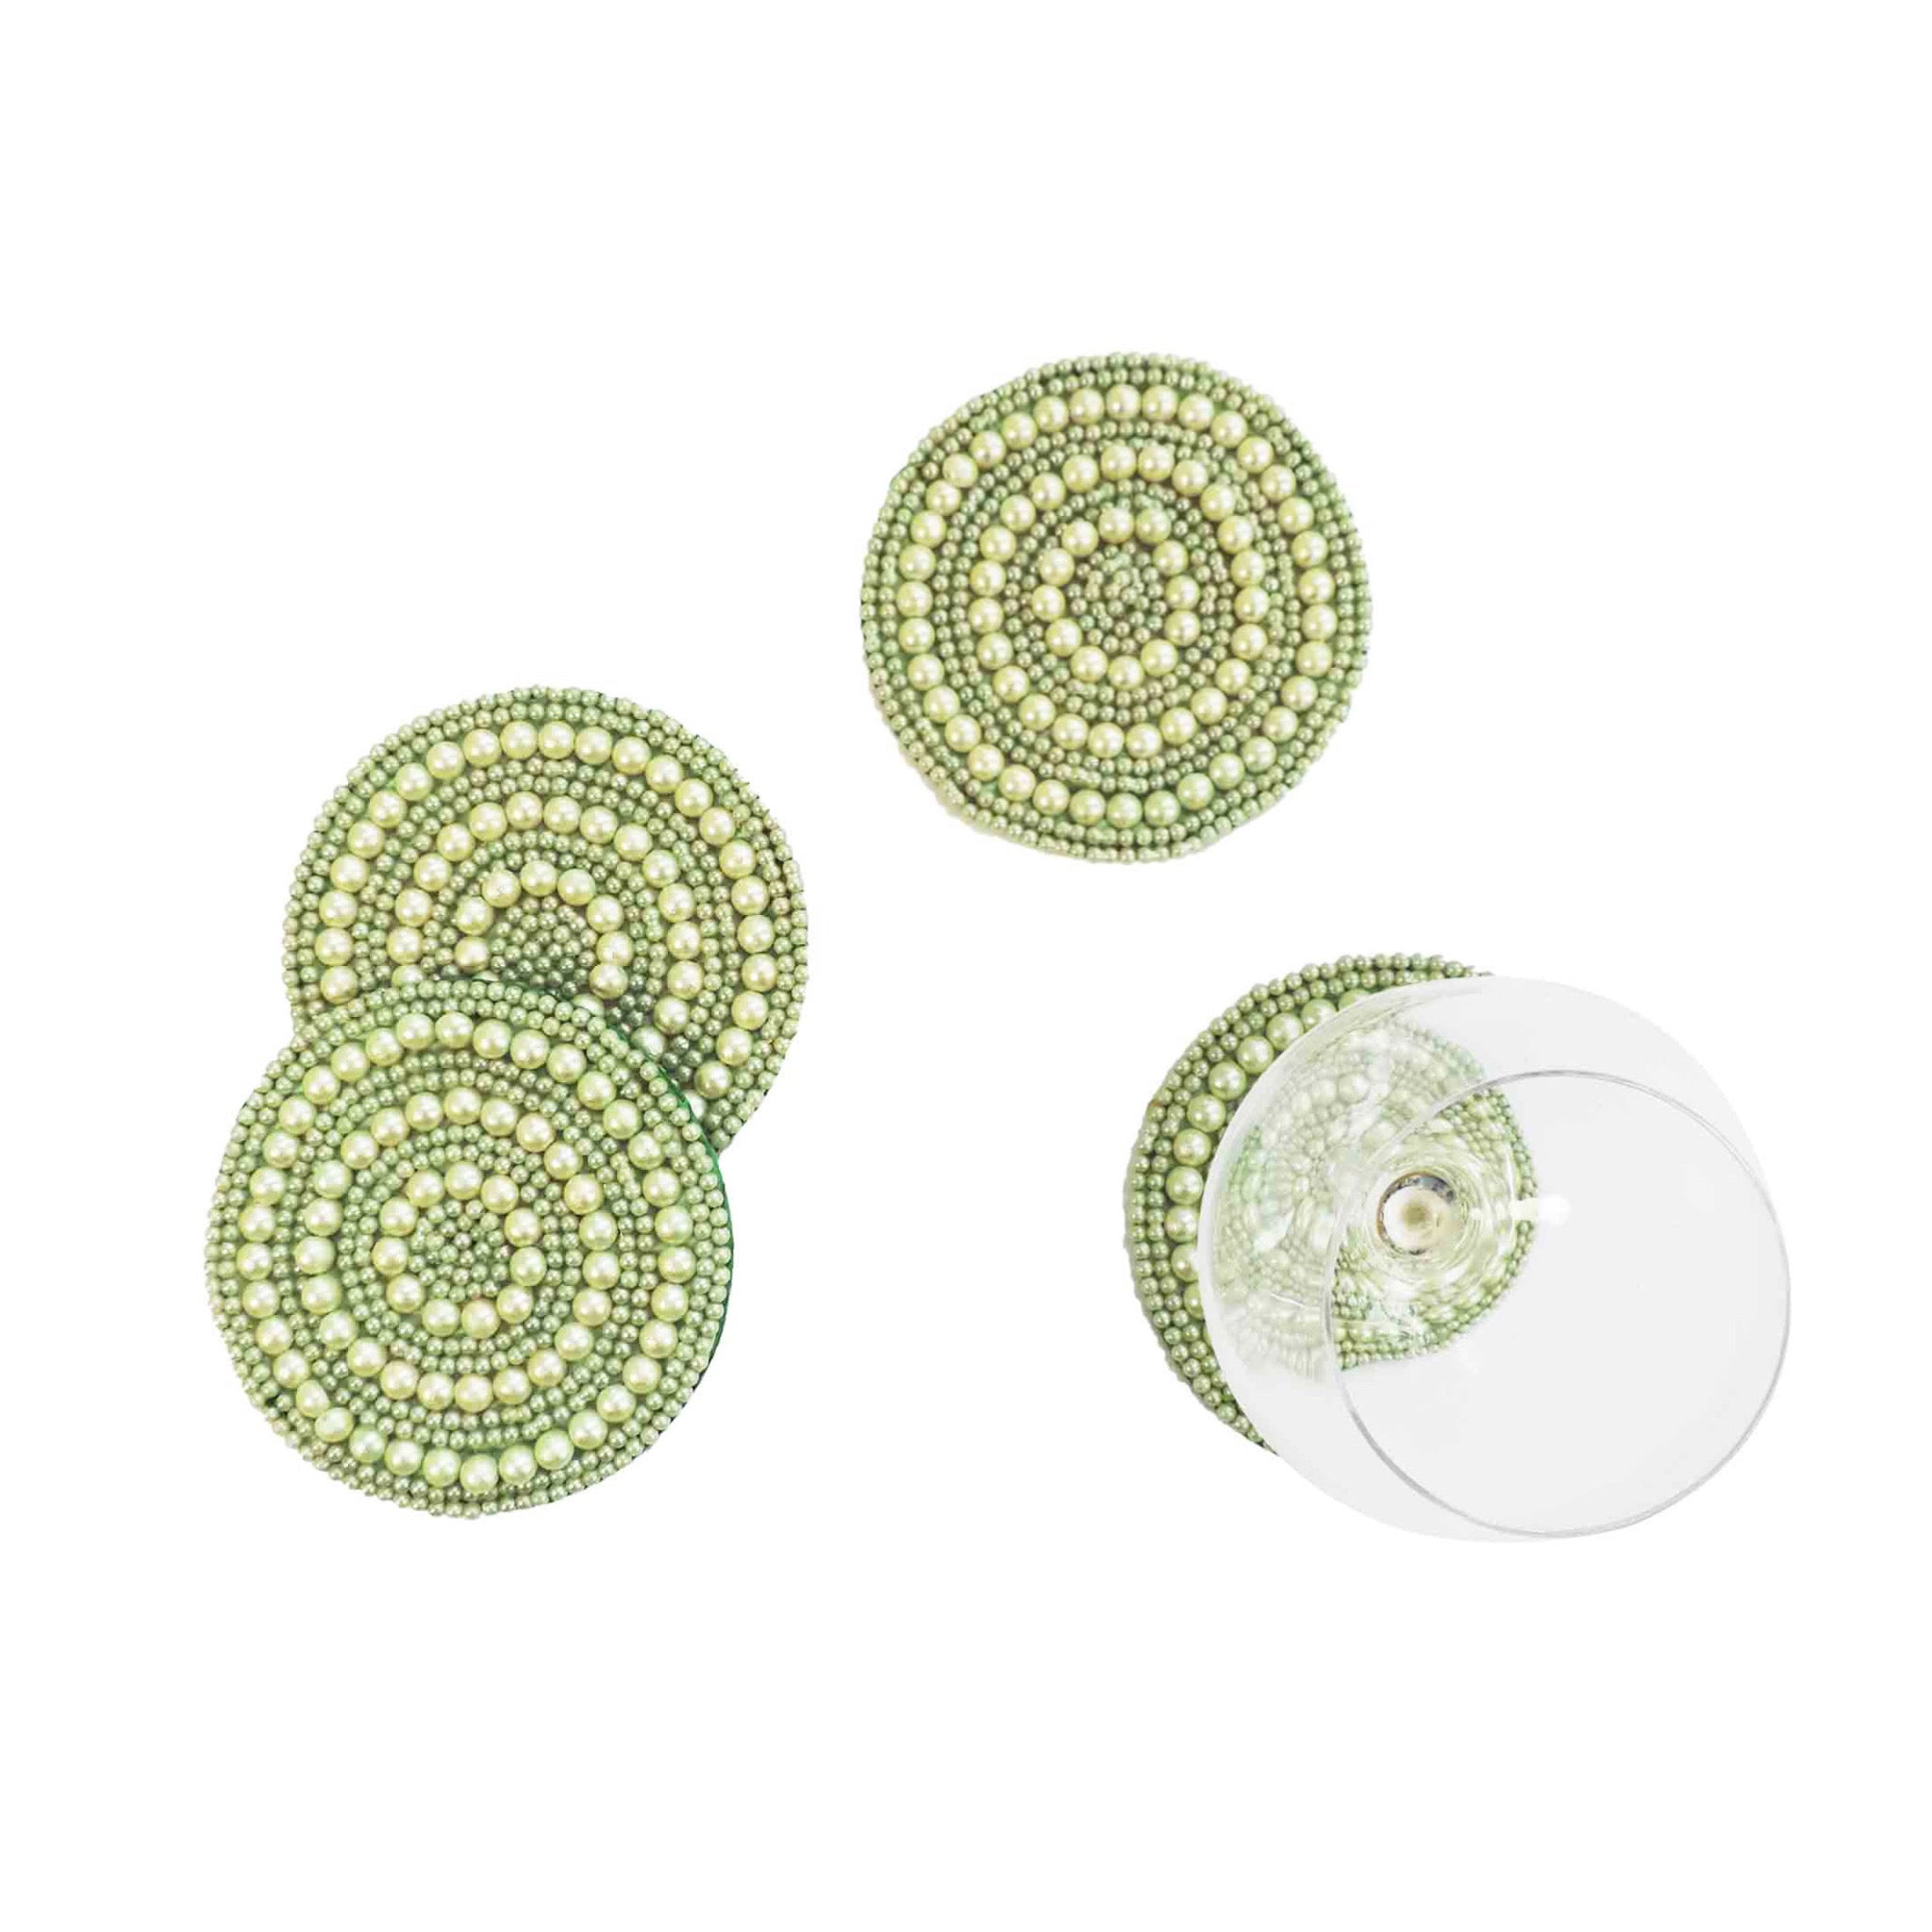 Full Circle Embroidered Coaster in Pale Green, Set of 4